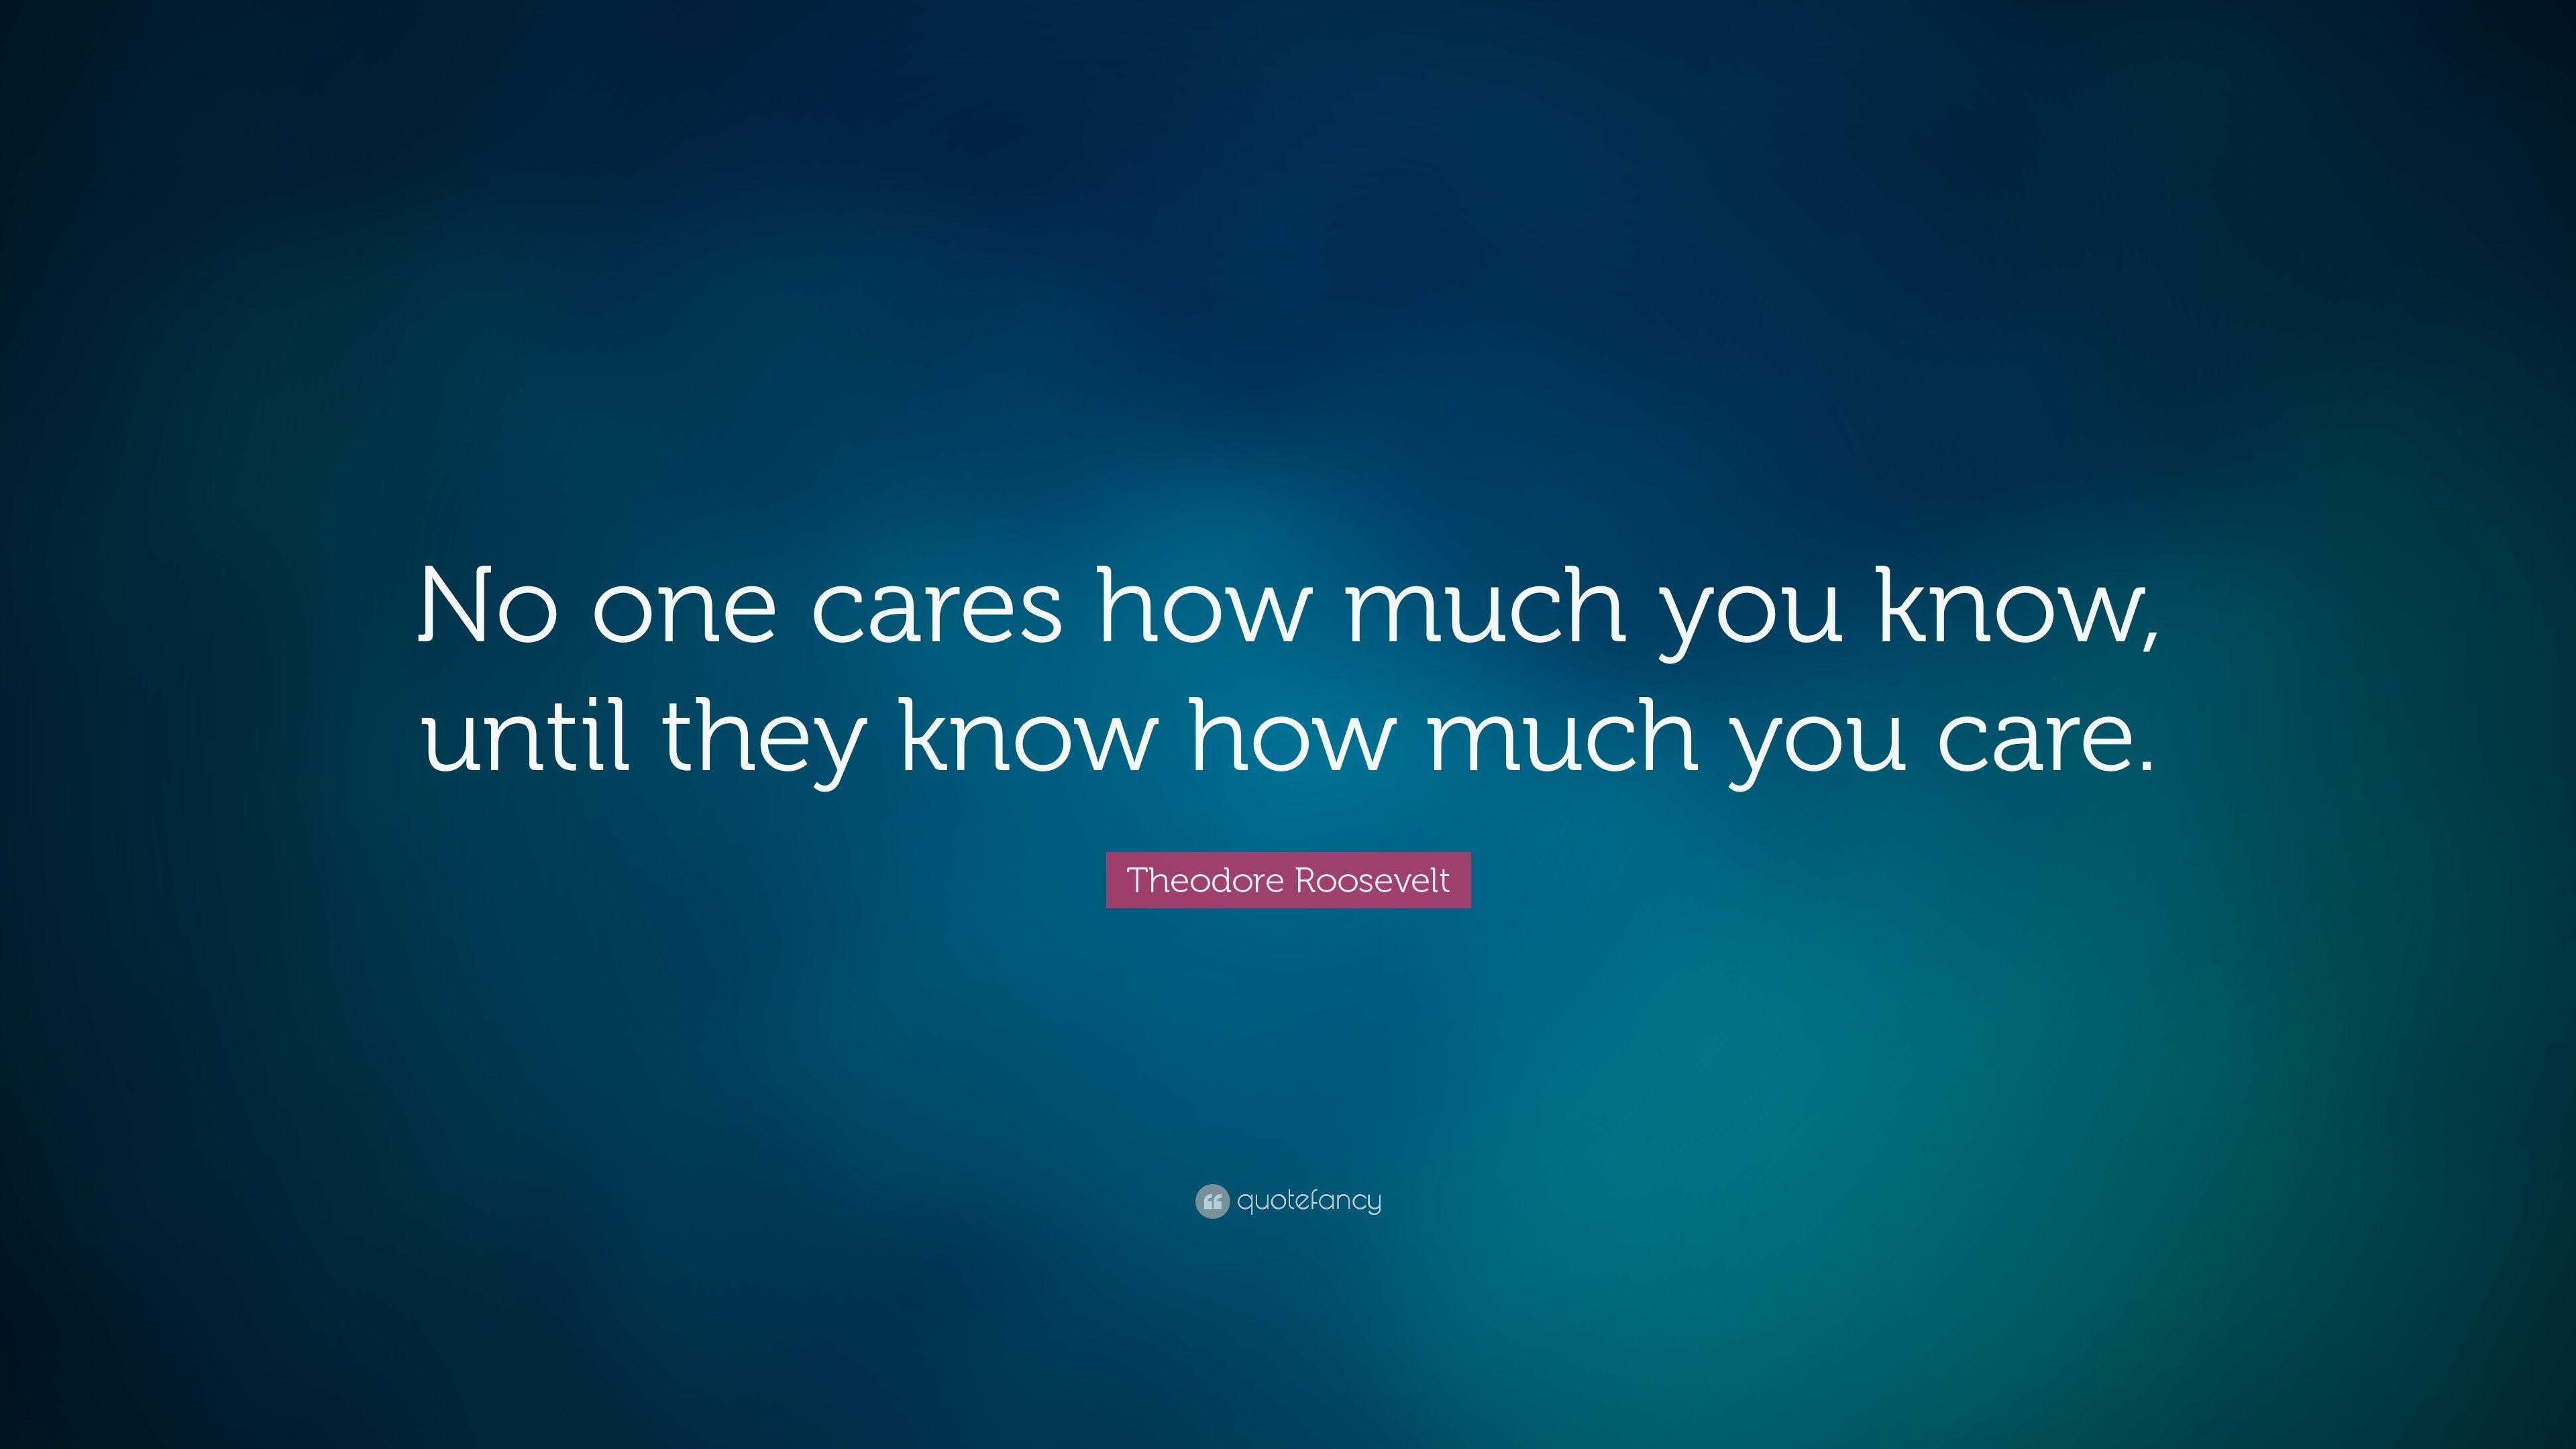 Theodore Roosevelt Quote: “No one cares how much you know, until